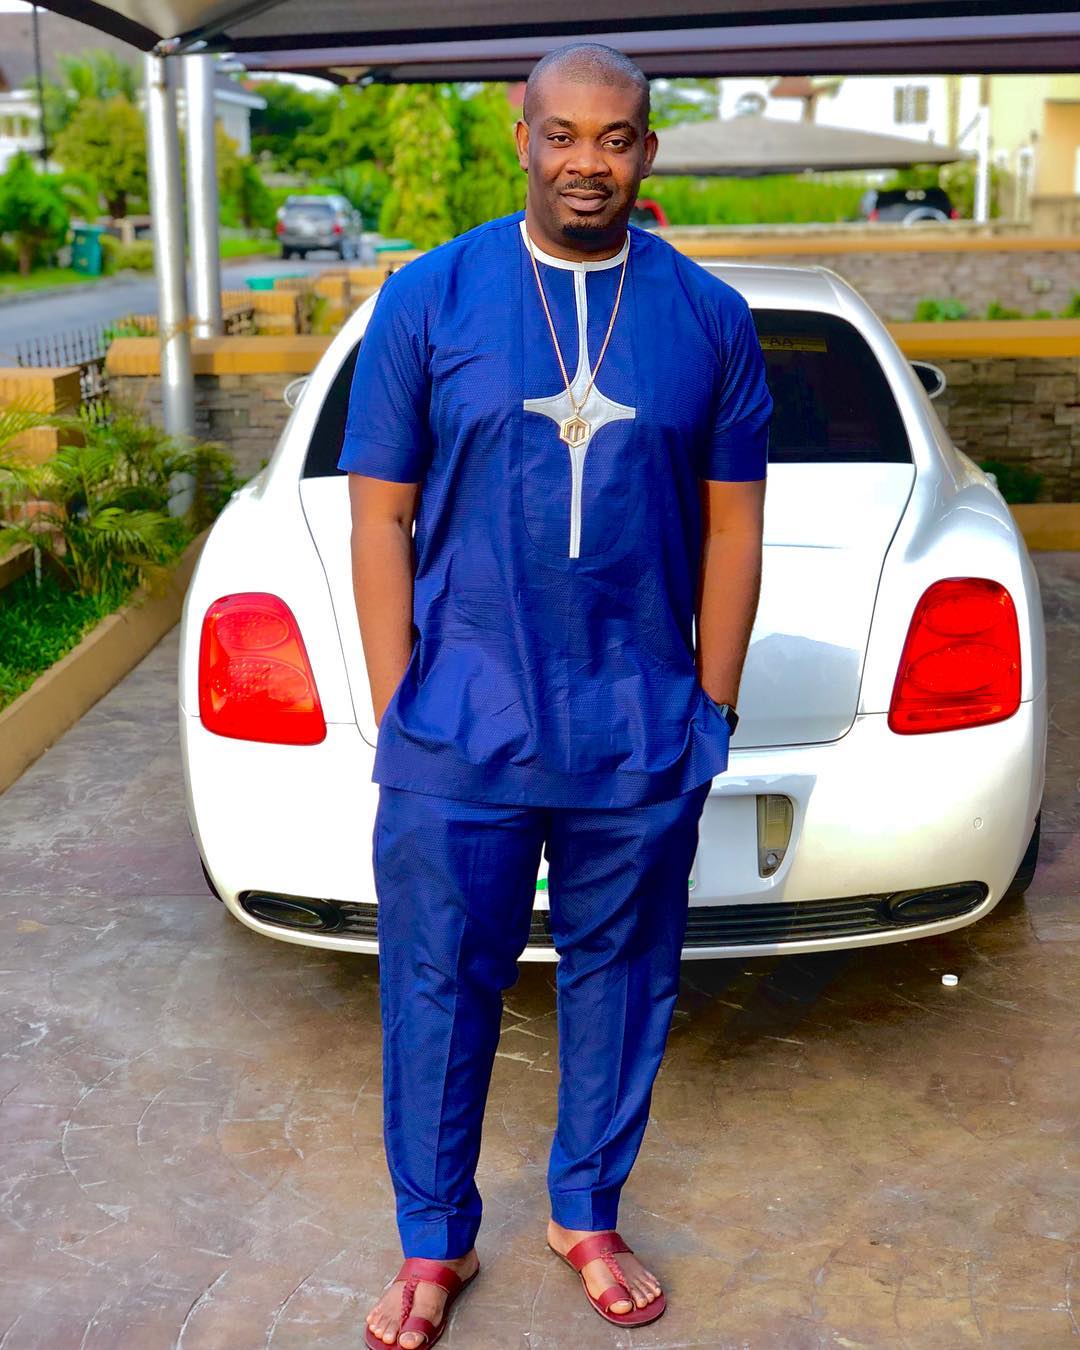 Marriage: 'Joining you soon bro' - Don Jazzy tells Banky W.